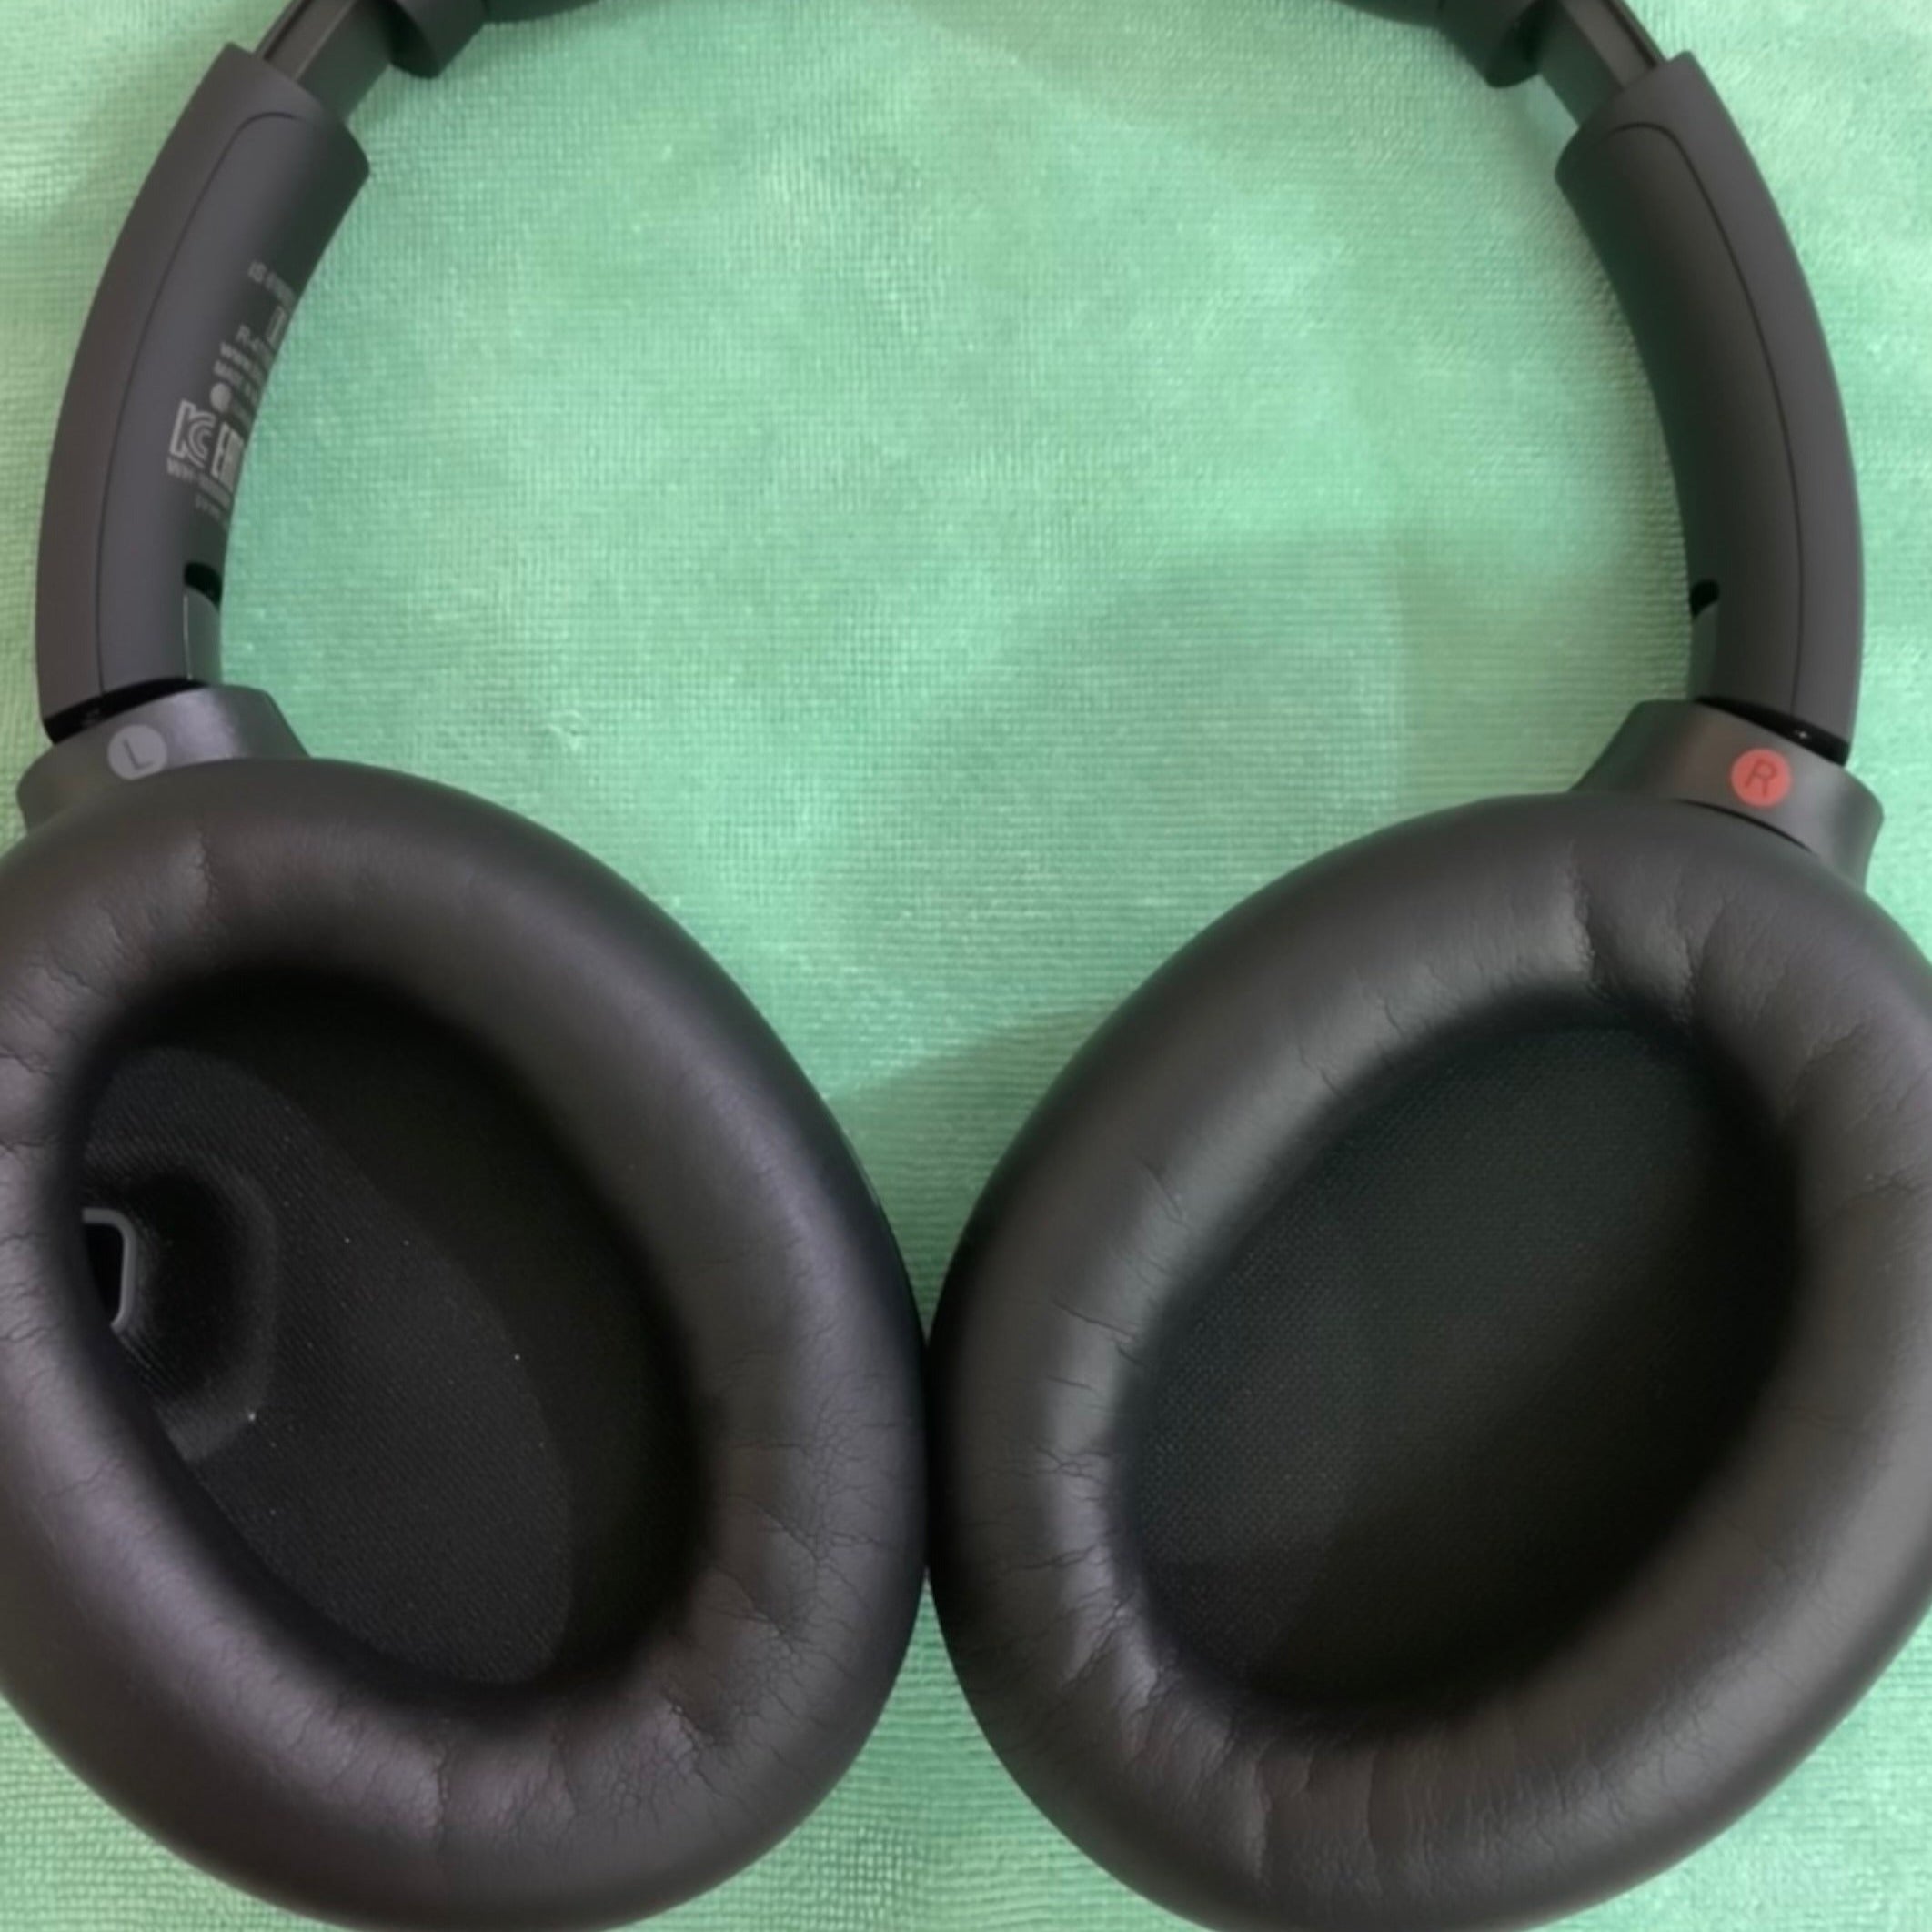 Sony - WH-1000XM4 (Pre-Owned)